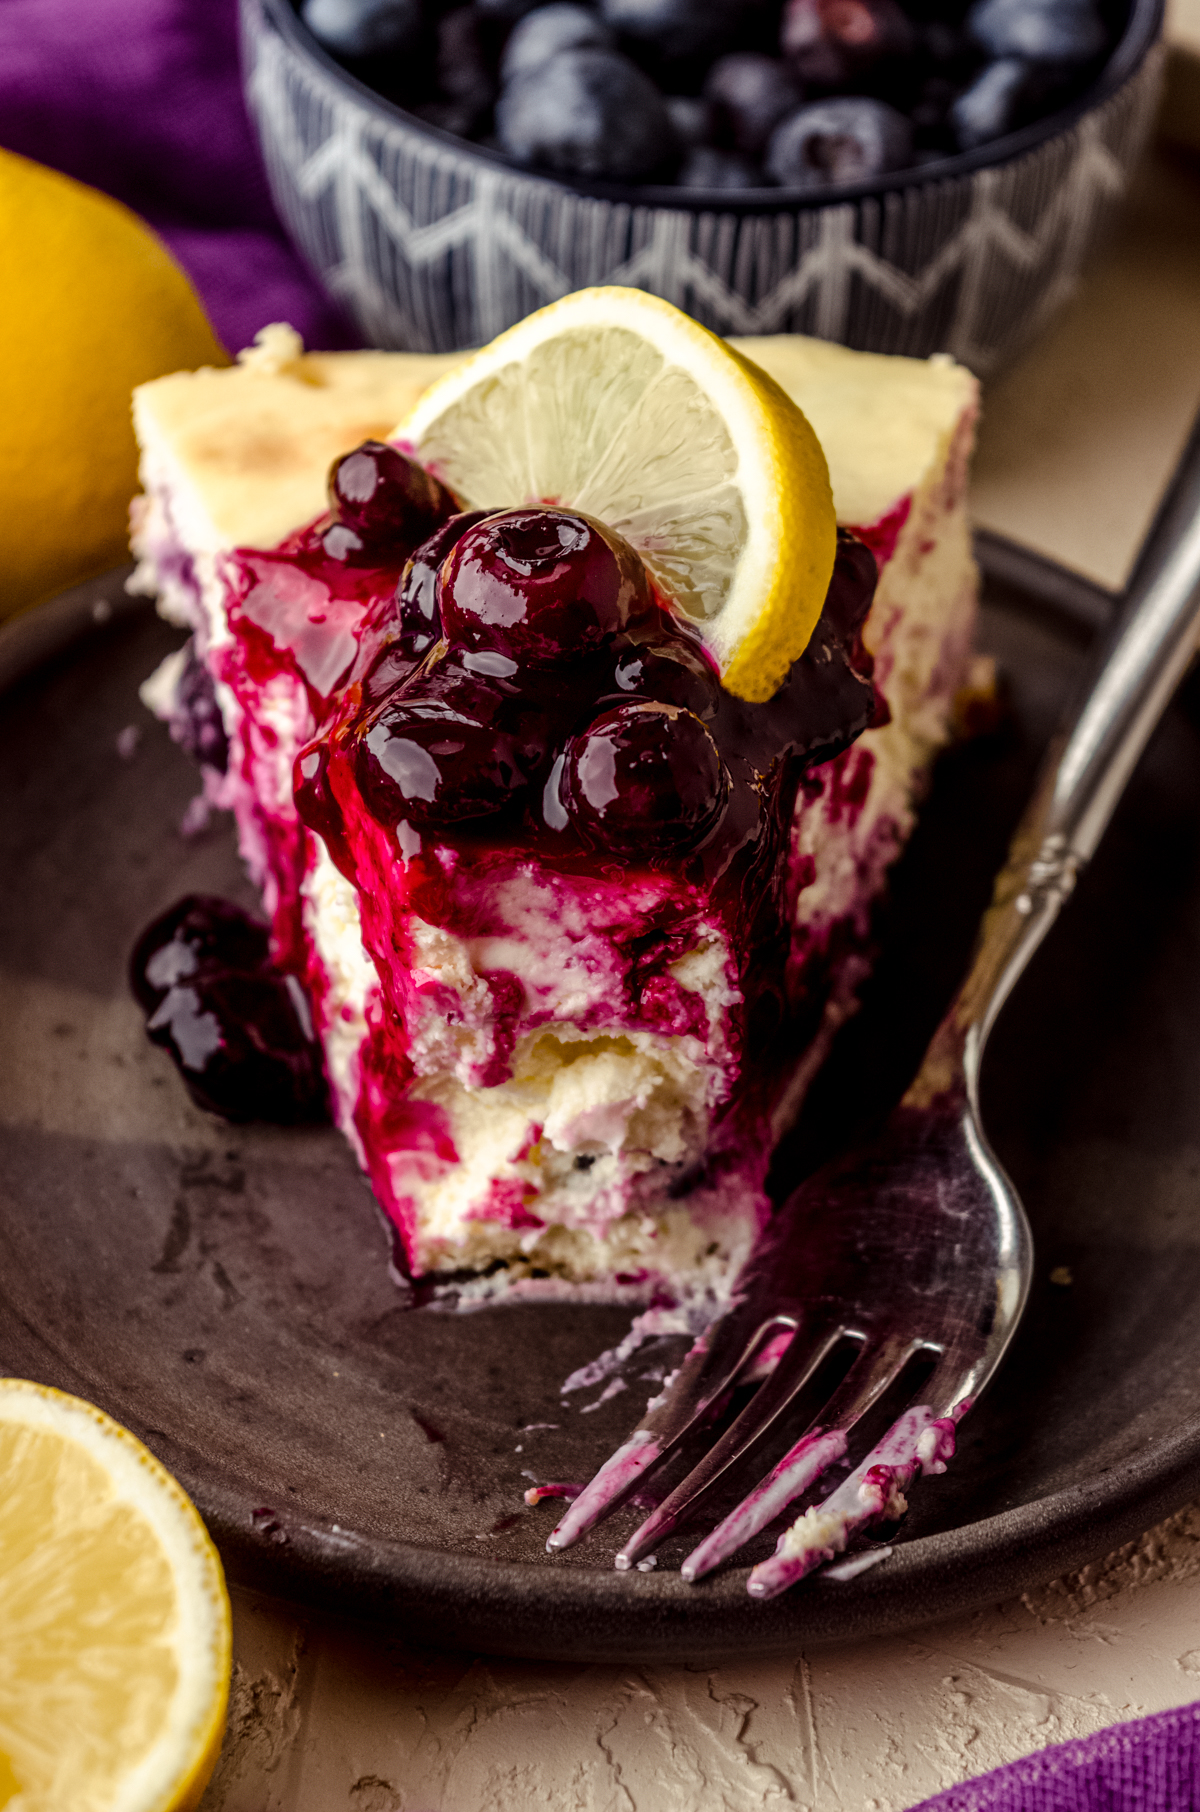 A slice of lemon blueberry cheesecake on a plate.